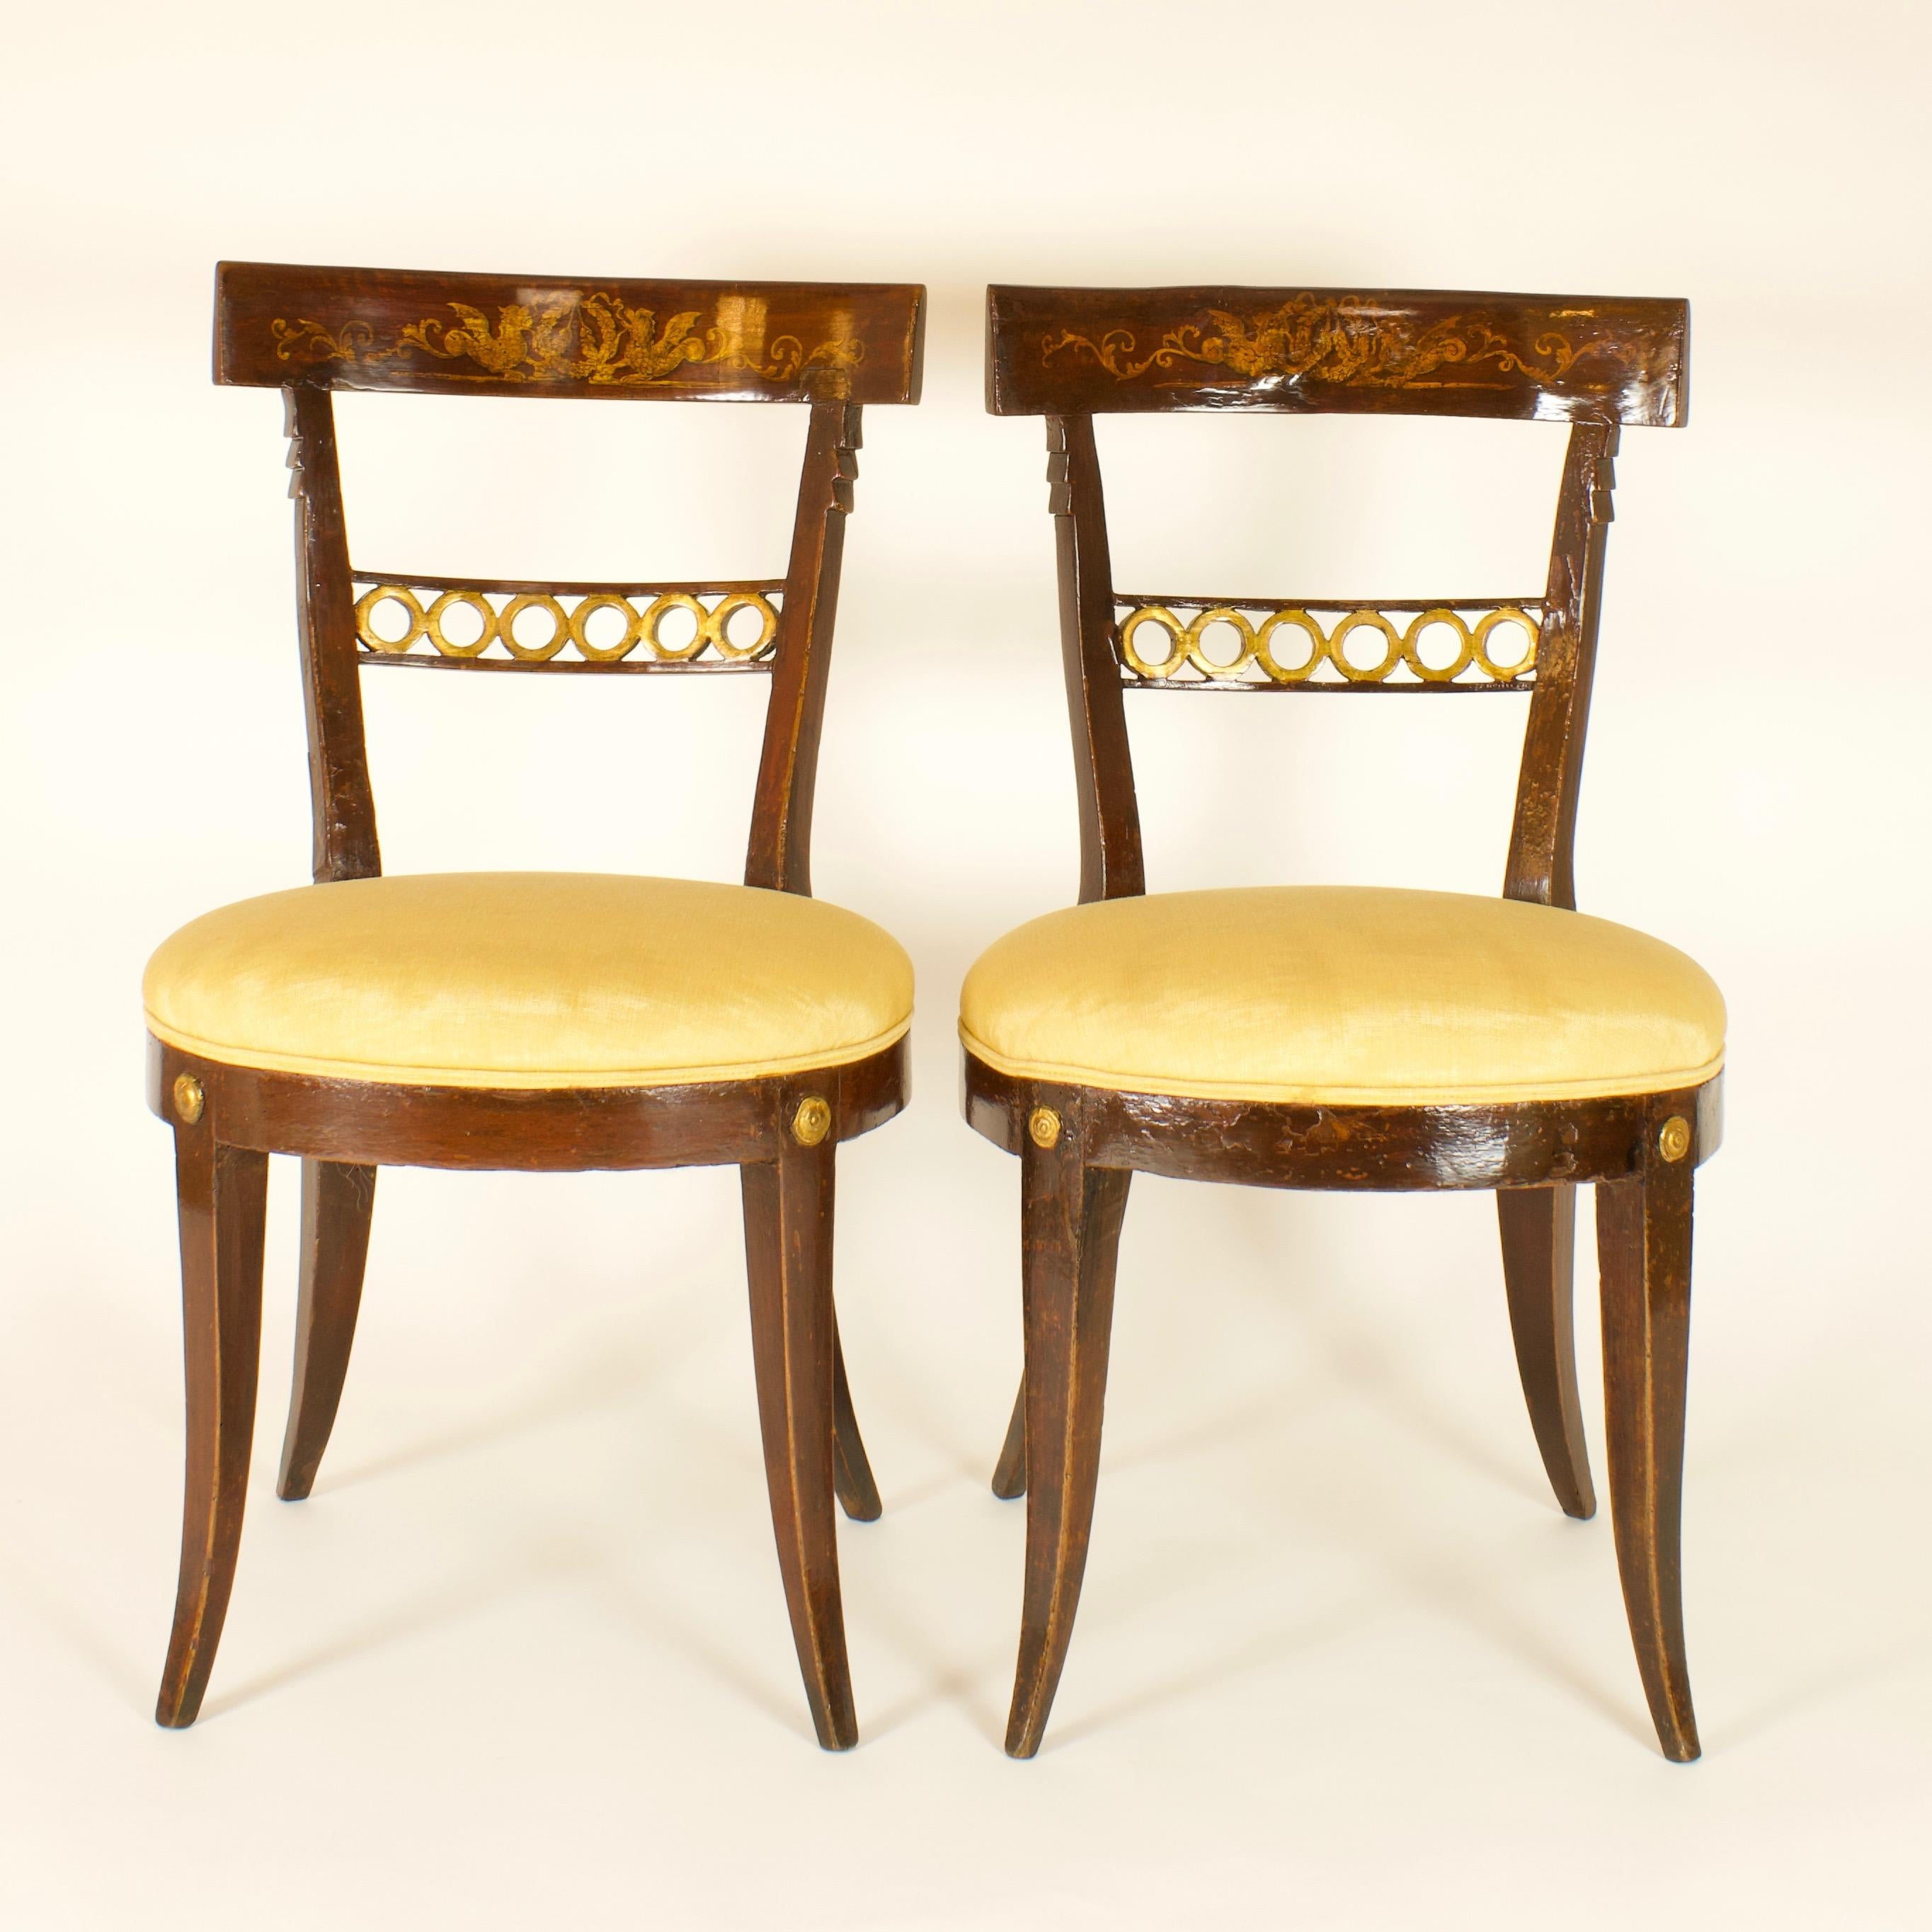 Pair of Late 18th Century Italian neoclassical Klismos Style side chairs

Exceptional pair of dark red varnished side chairs: the wide curving back with frieze decoration, the raked and canted front and back sabre legs based on the remarkable ranked